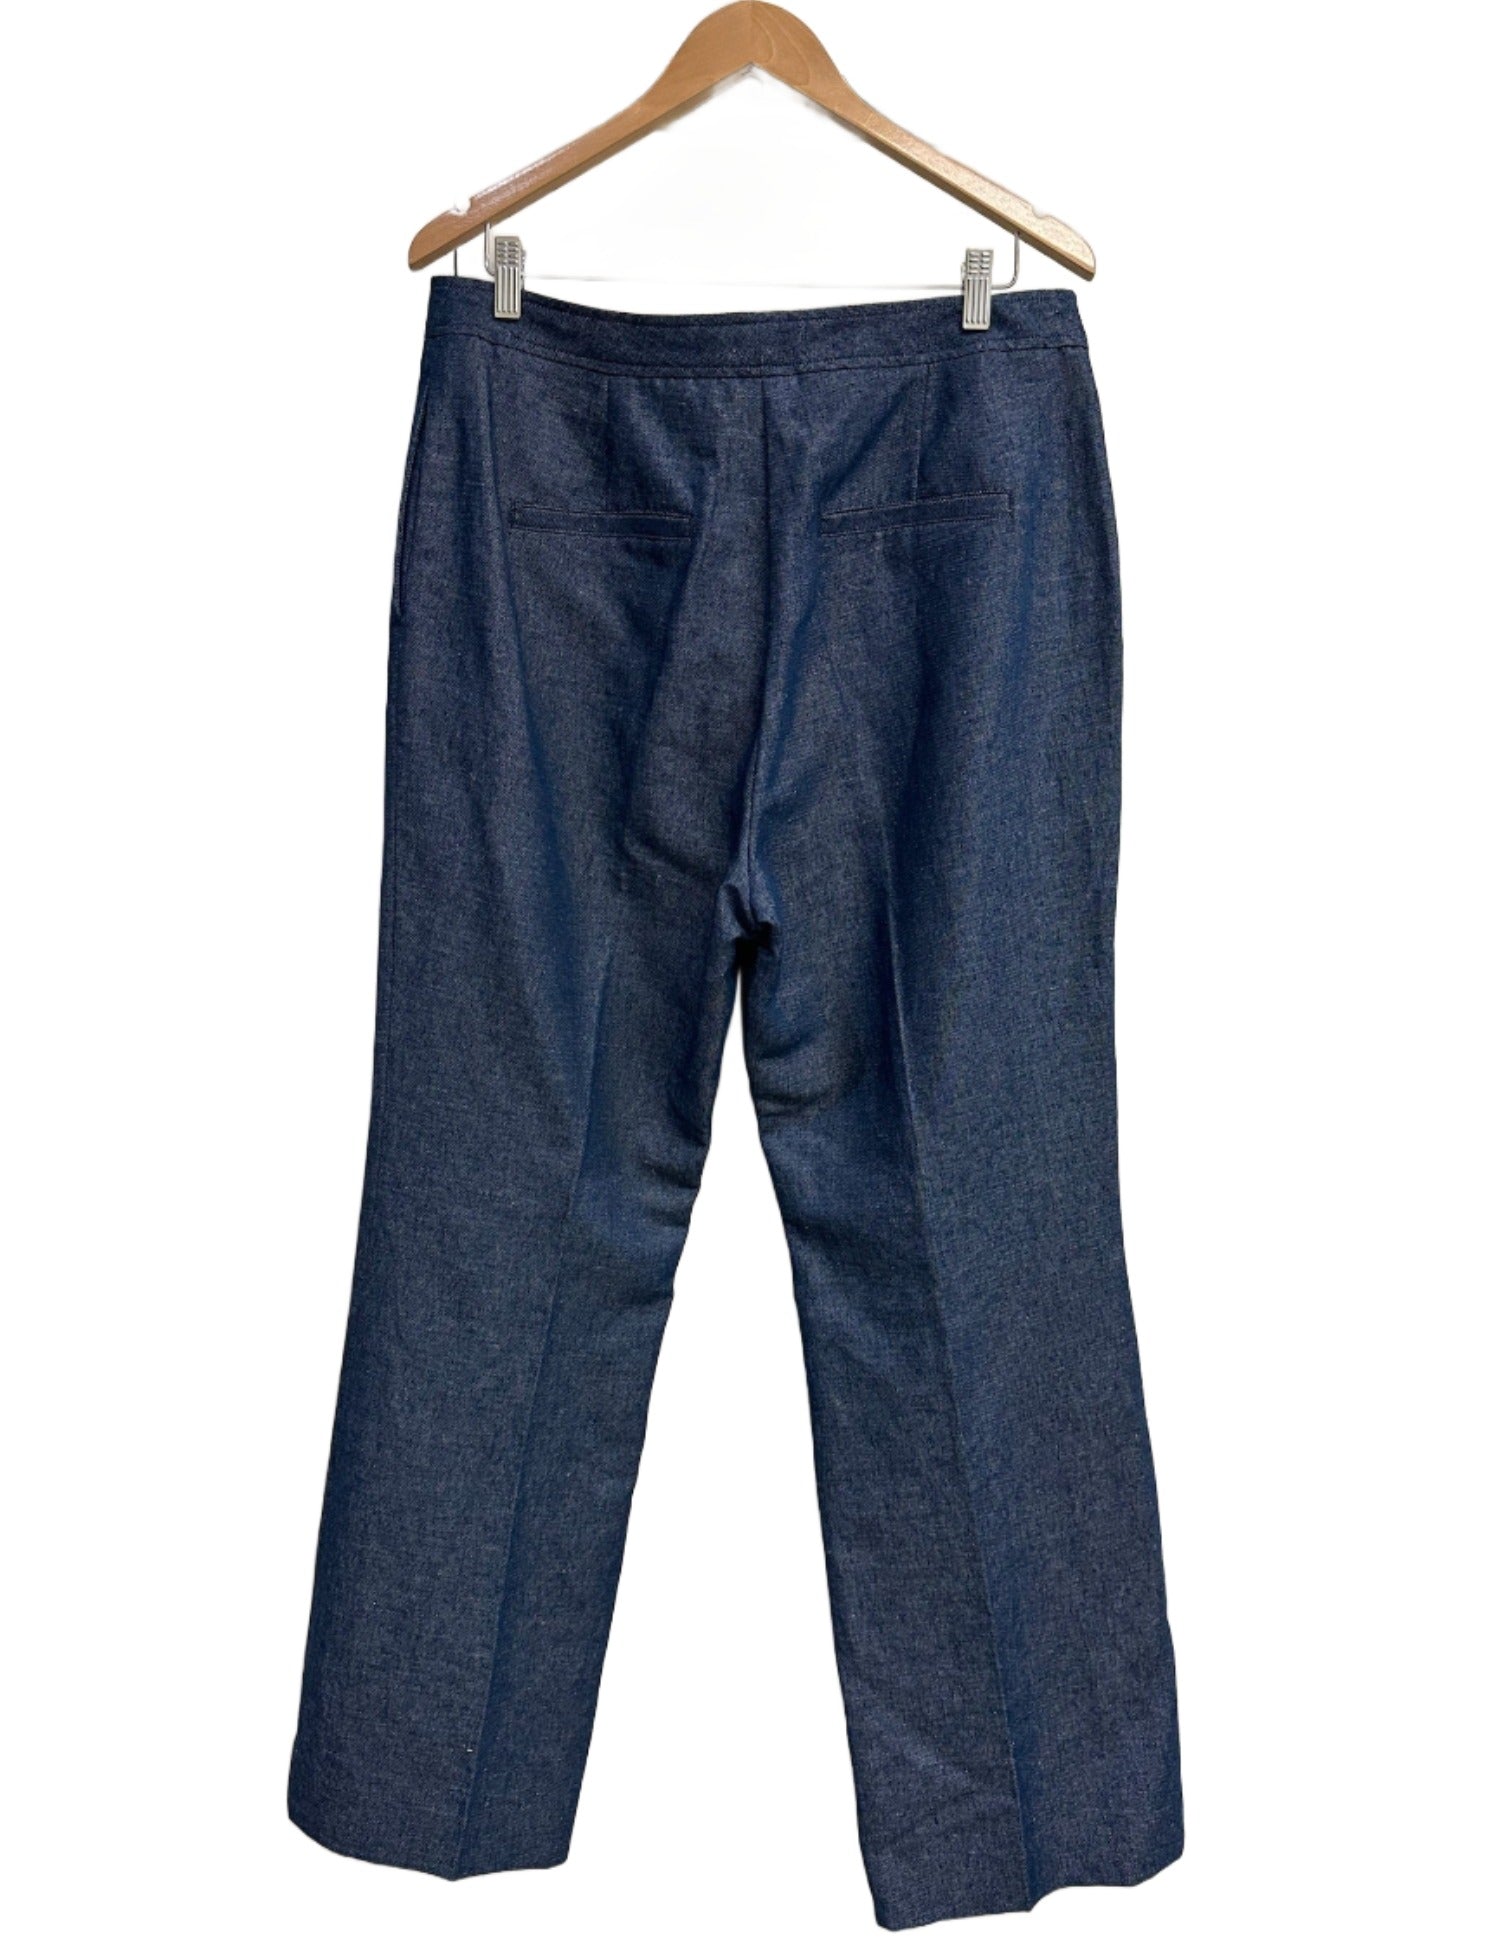 Witchery French Blue Pants